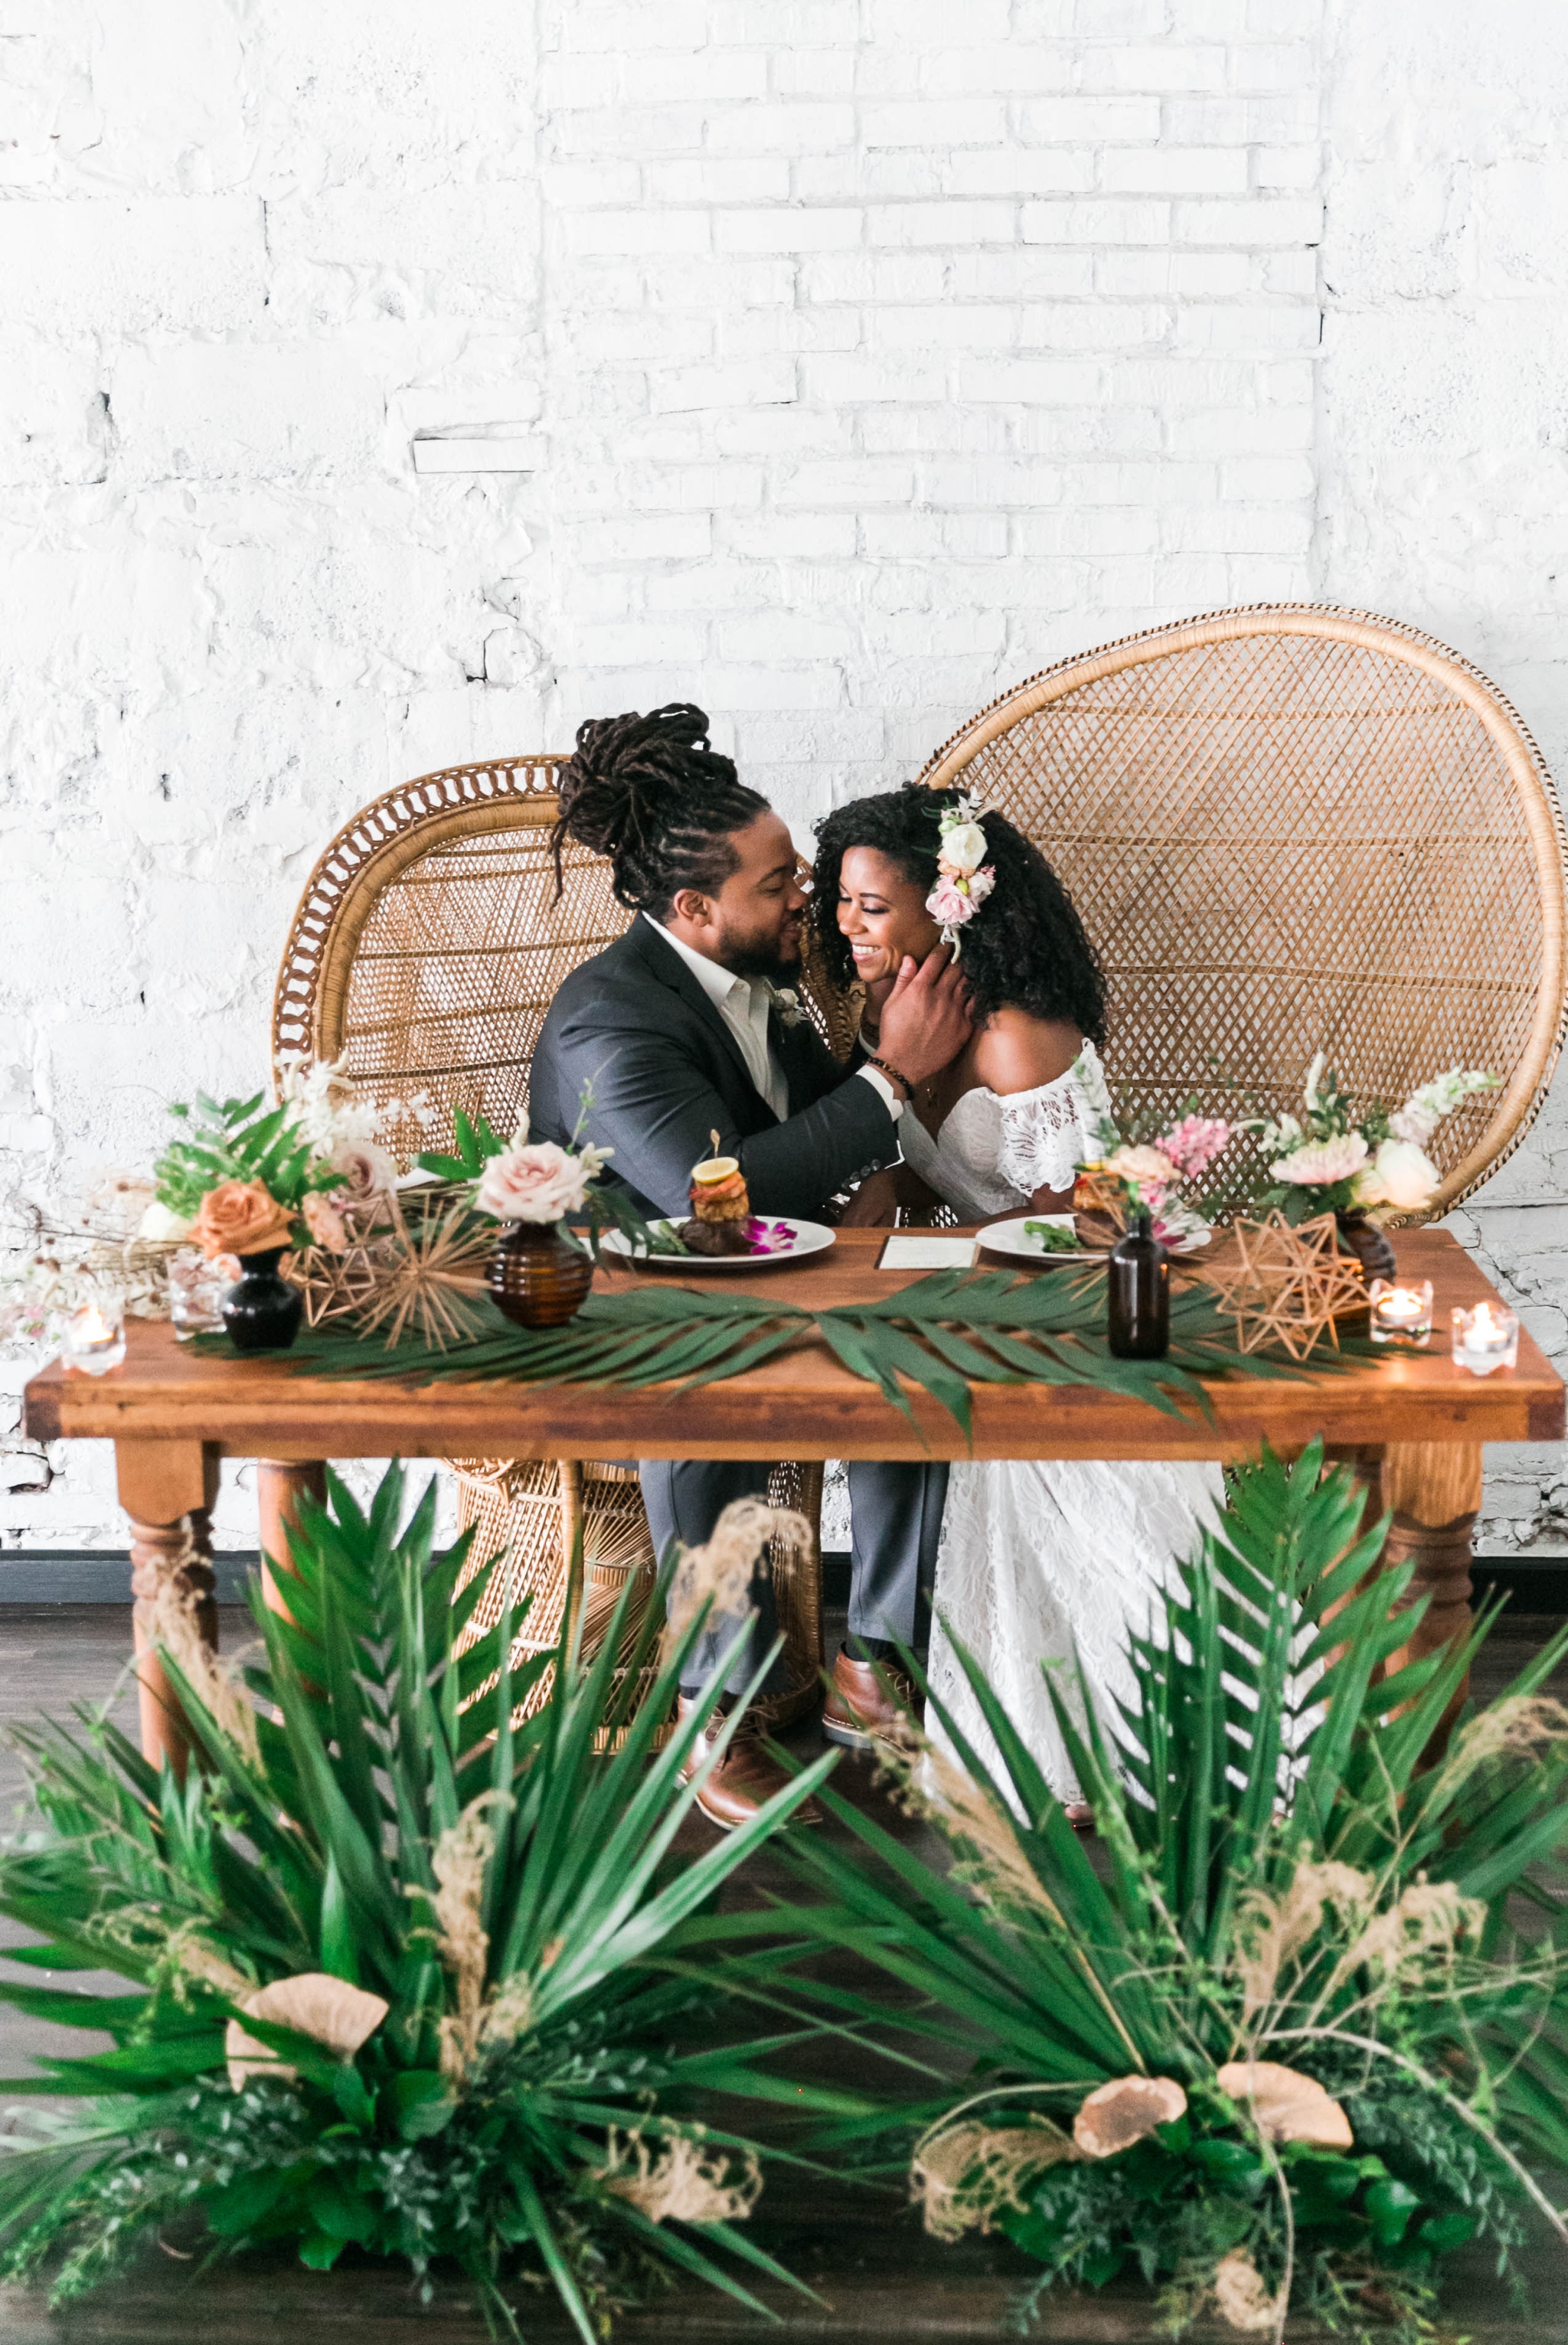  Bride and groom at the sweetheart table at their wedding reception sitting in Midcentury Woven Wicker Peacock Chairs - Black Love - Tropical Destination Wedding Inspiration - Oahu Hawaii Wedding Photography 